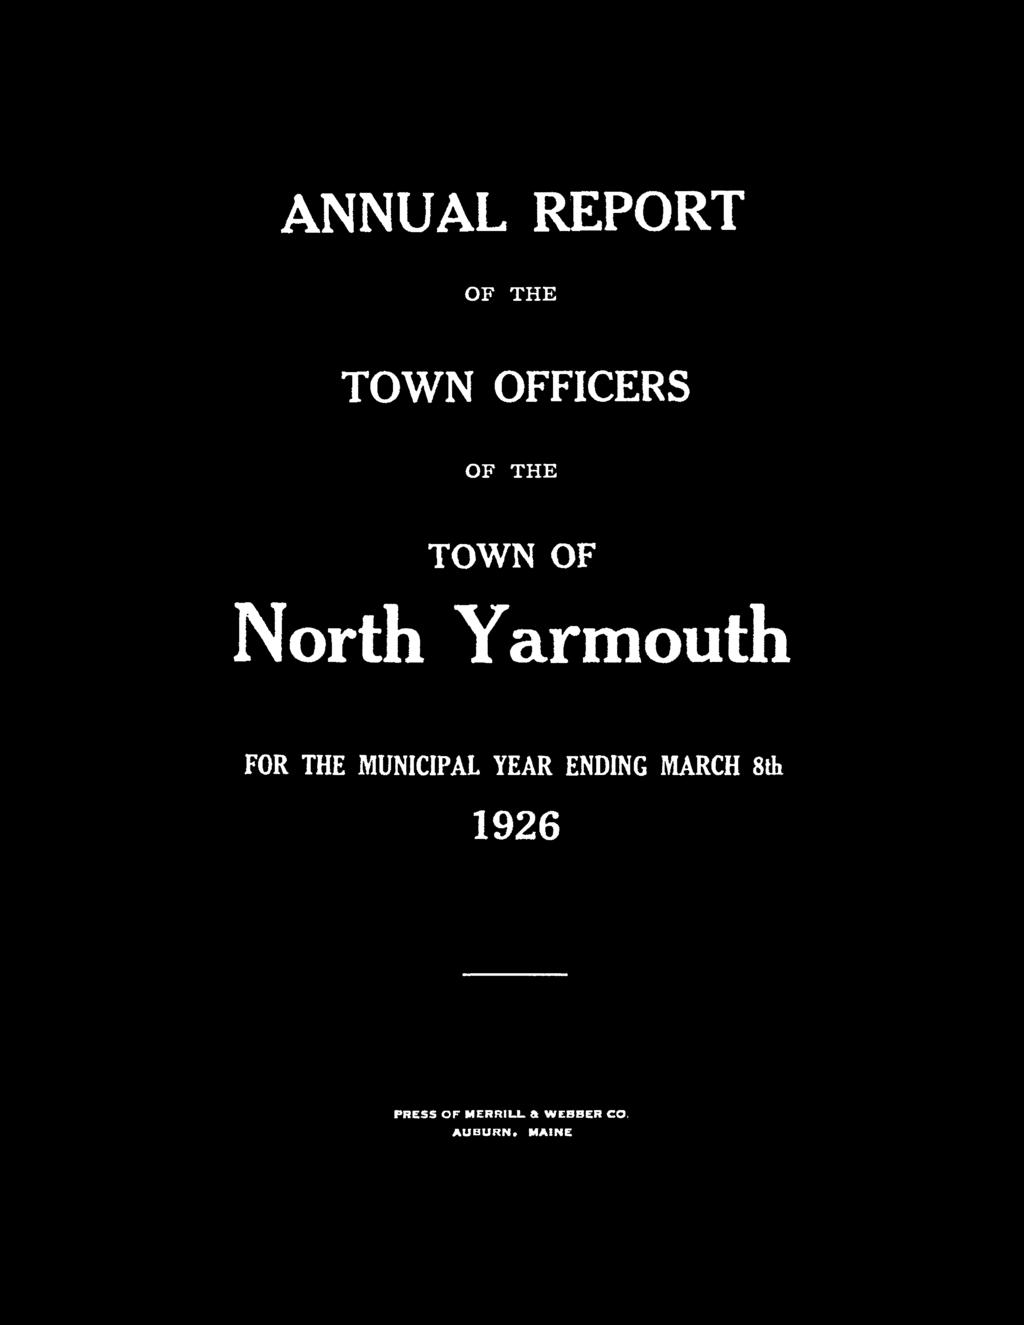 ANNUAL REPORT OF THE TOWN OFFICERS OF THE TOWN OF North Yarmouth FOR THE